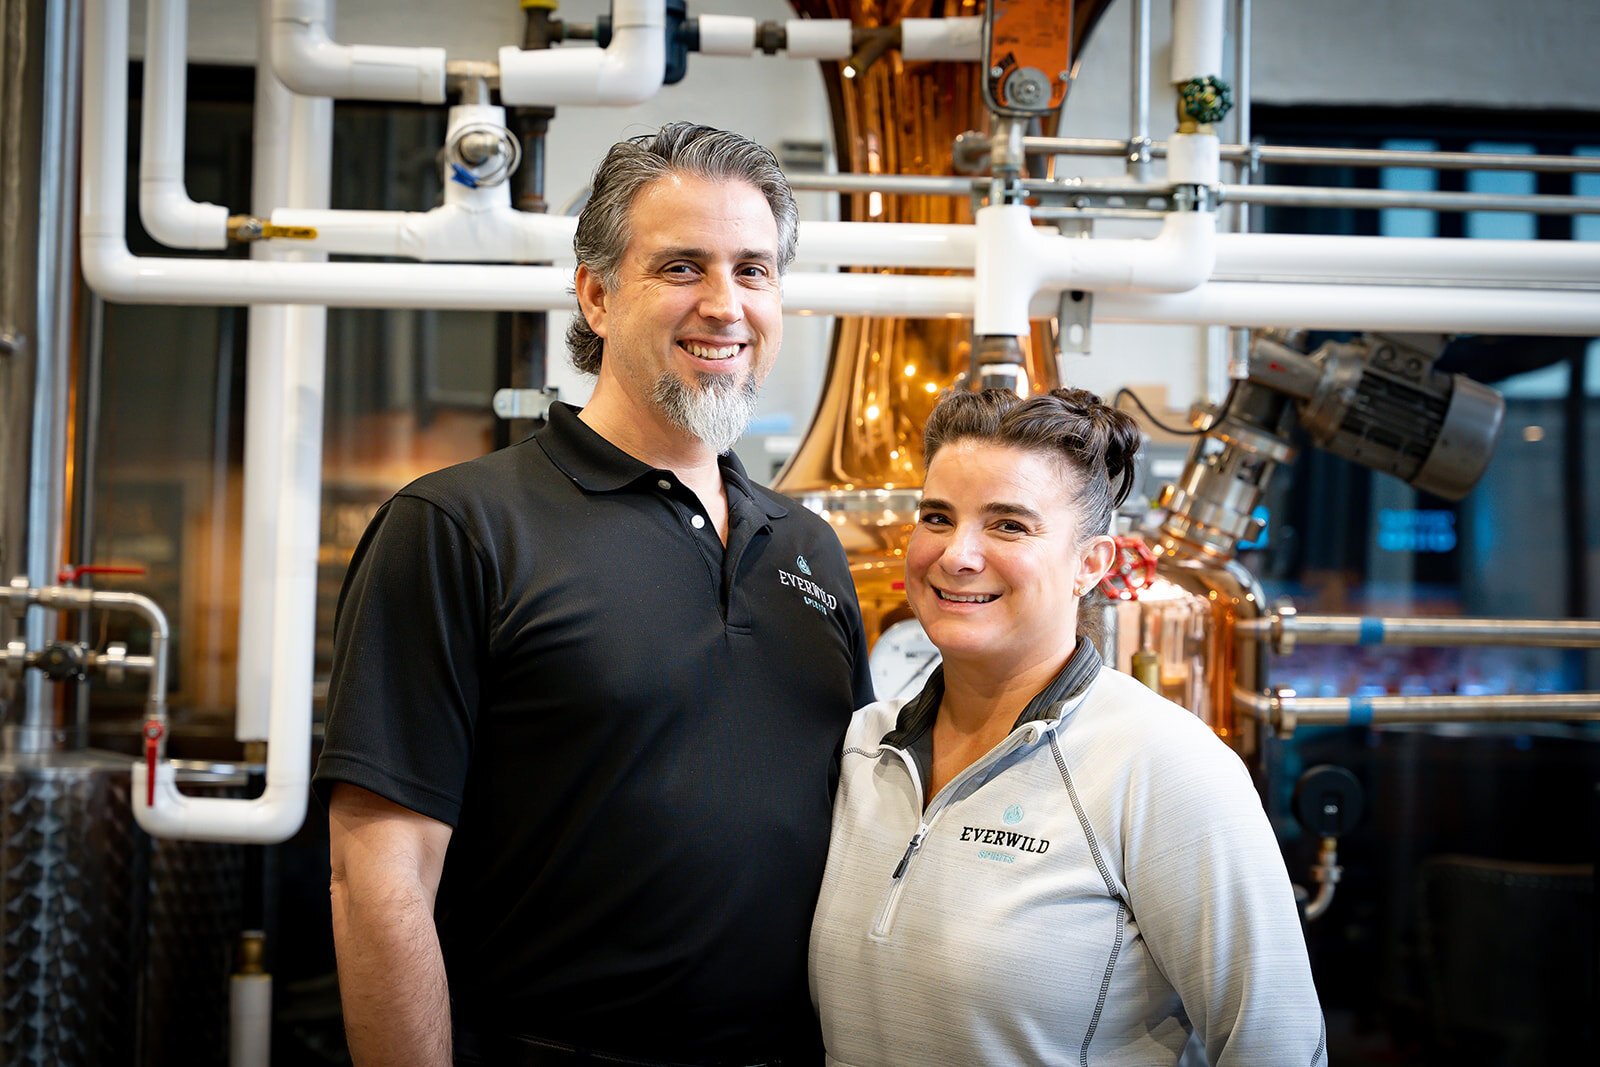 Everwild owners Rick and Gia Gennari-Lynch